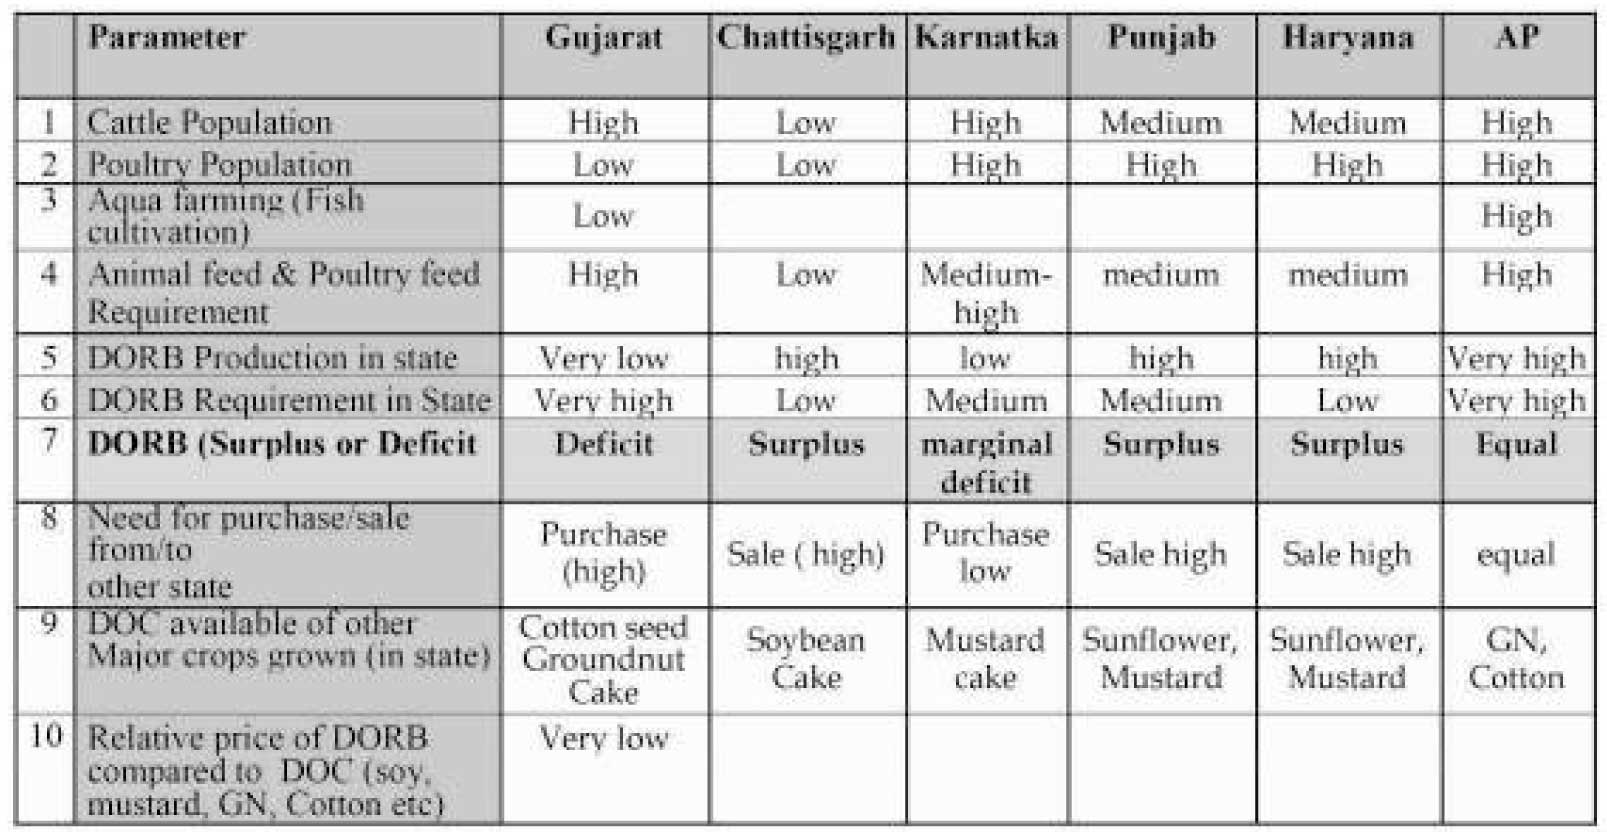 Indian Feed Industry - A Trend Analysis